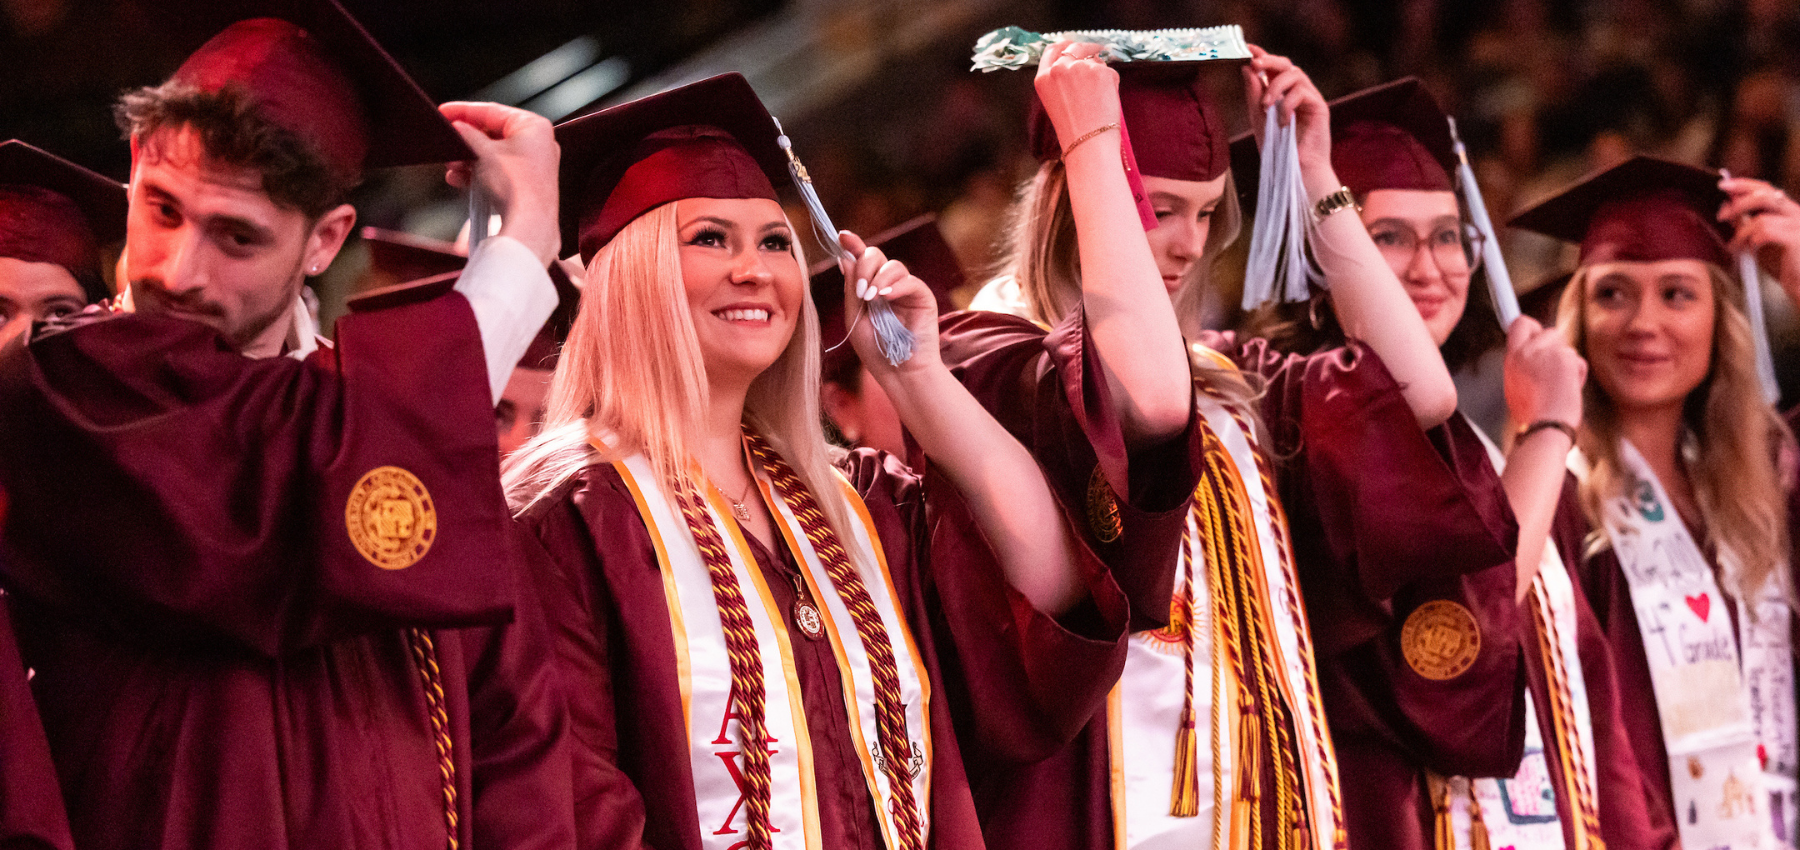 Loyola School of Education Graduates Celebrate commencement with cap and gown